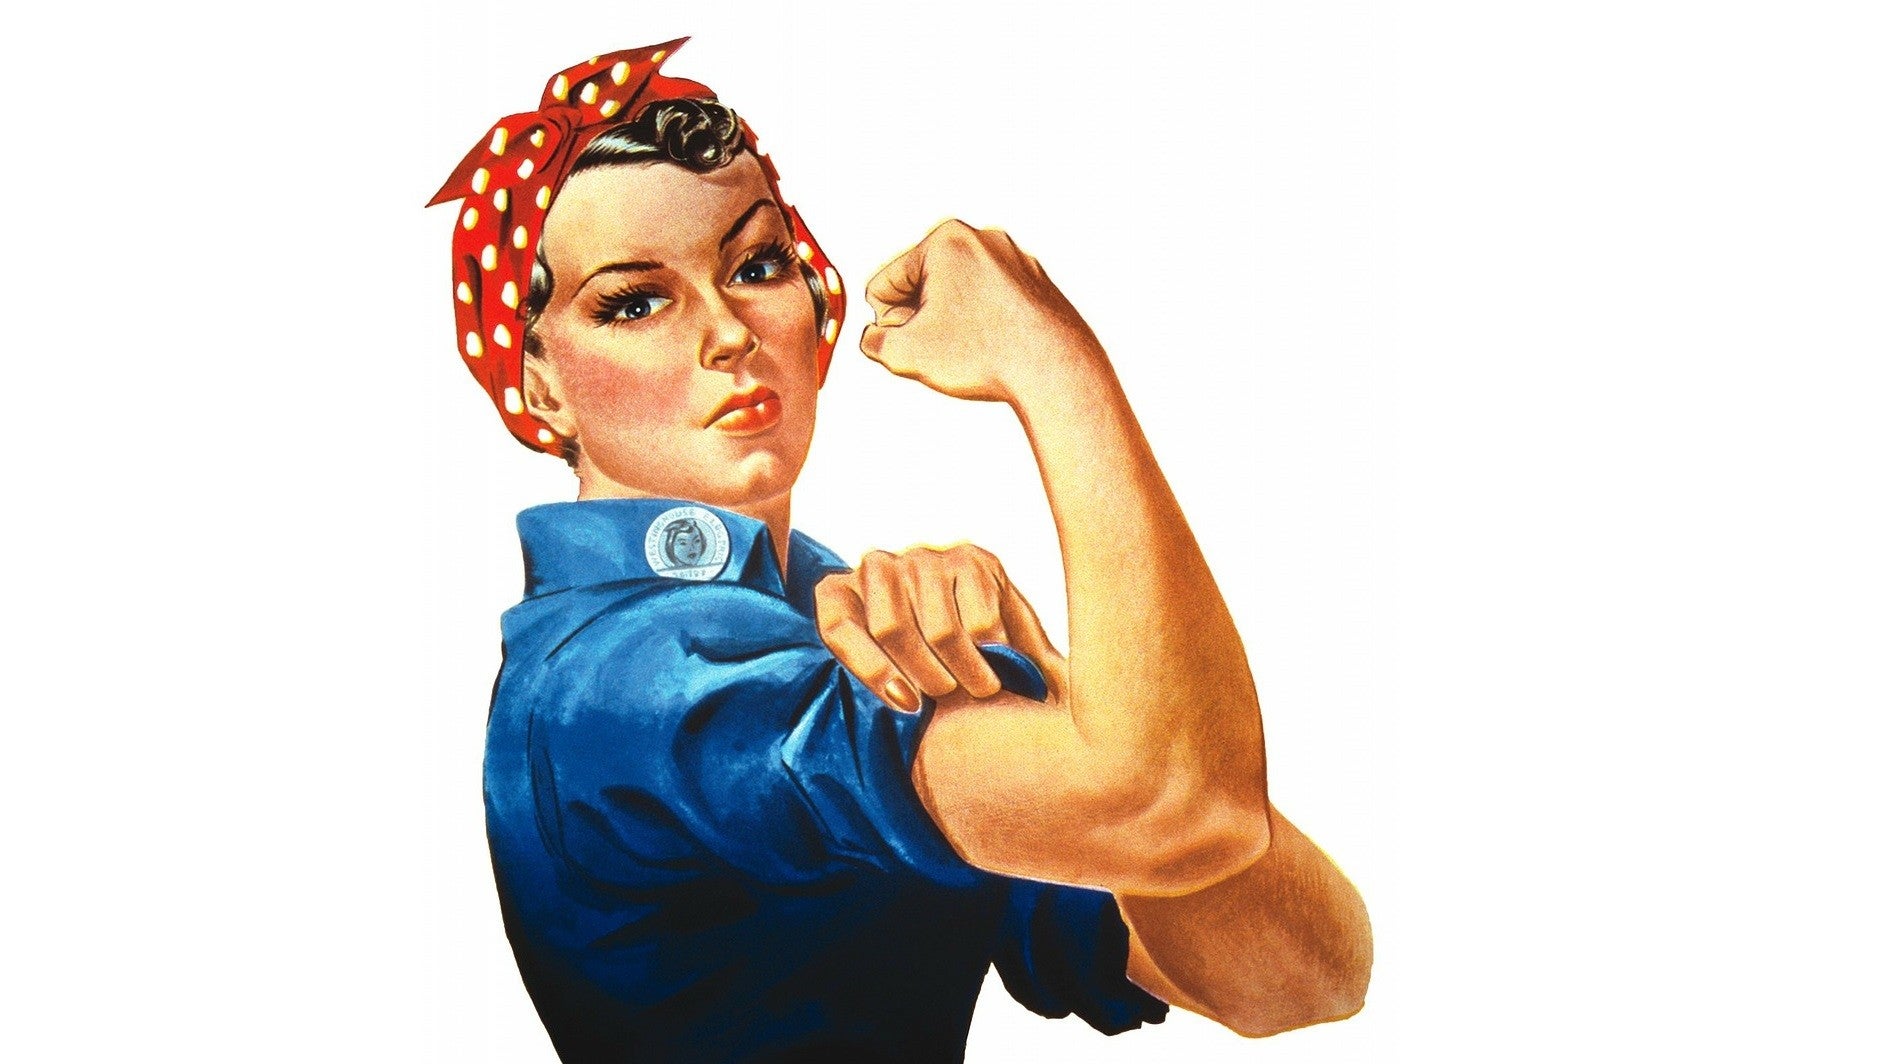 "We can do it!" image of a woman flexing her muscles from a WW2 US propaganda poster often called Rosie the Riveter